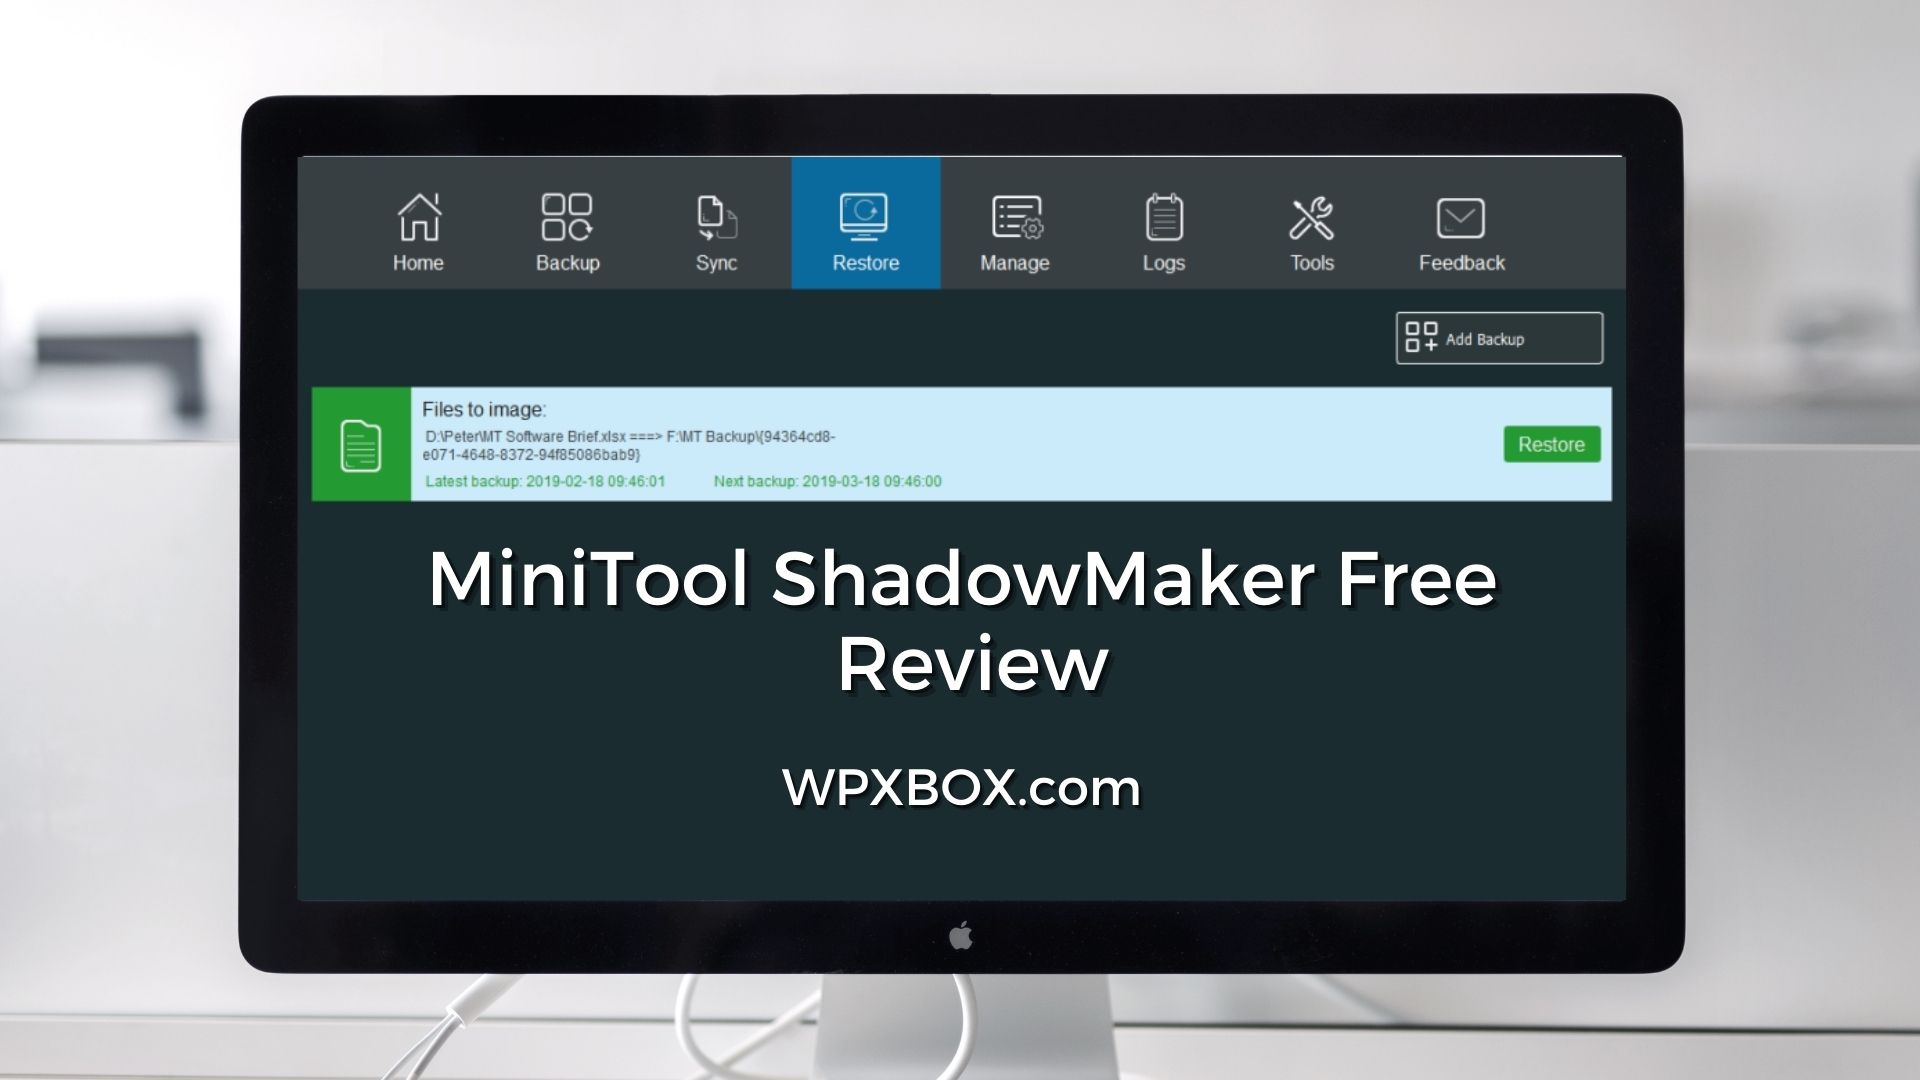 download the last version for ios MiniTool ShadowMaker 4.2.0